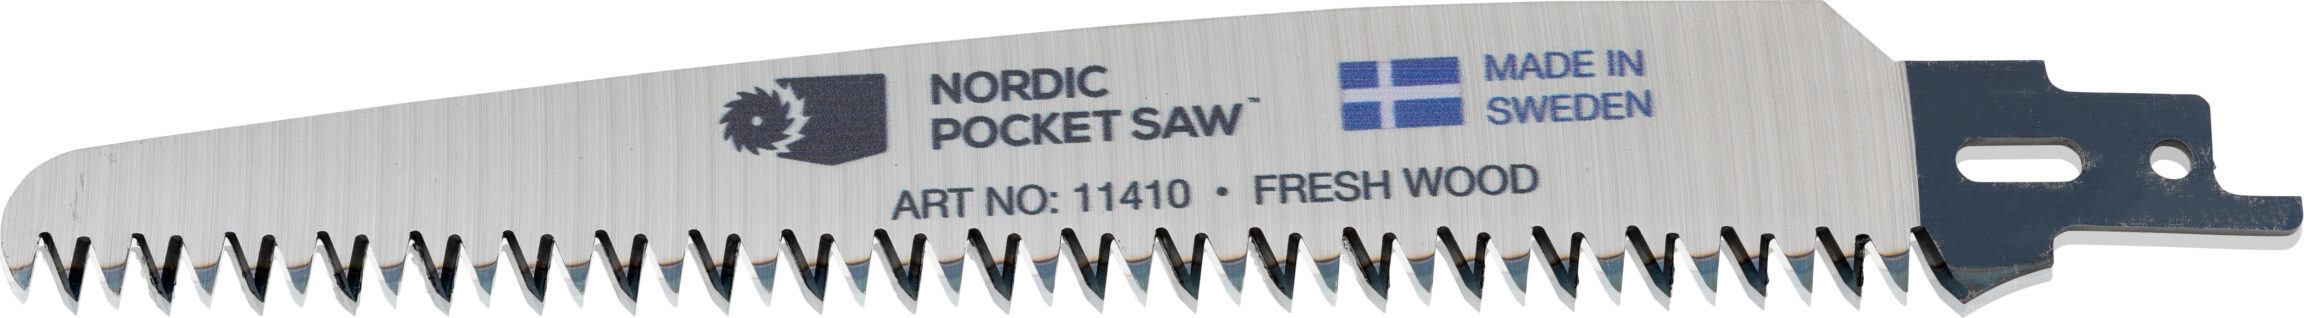 Nordic Pocket Saw Extra Saw Blade For Fresh Wood Silver